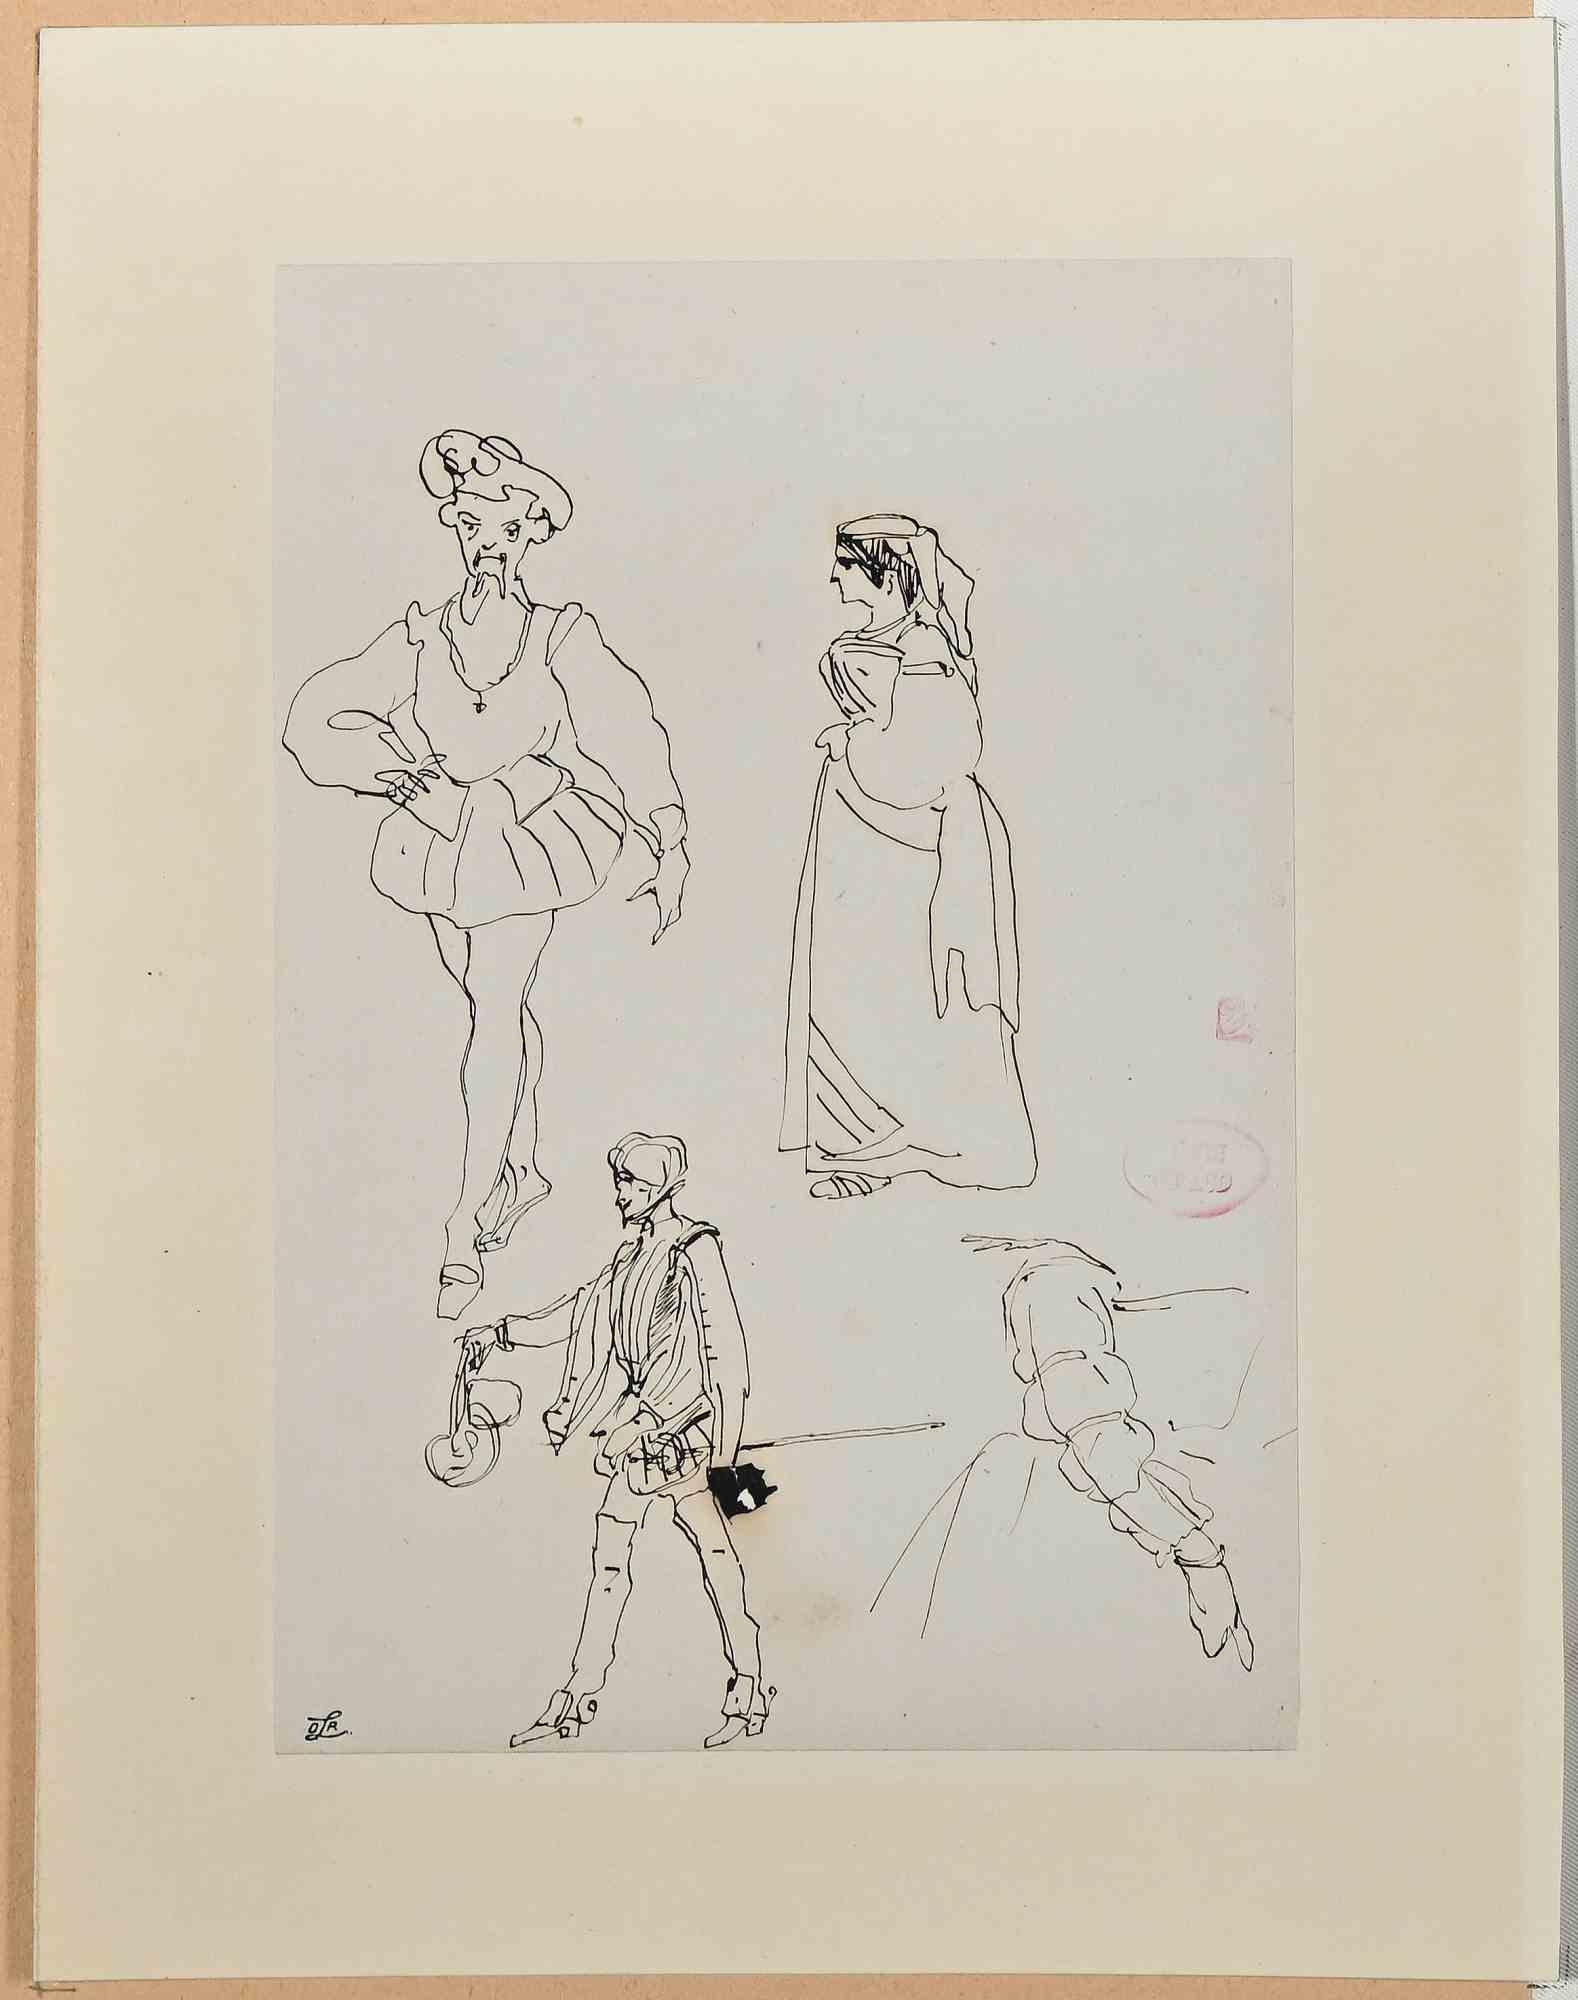 Portraits - Drawing on Paper by E. Giraud - Late 19th Century - Art by Eugène Giraud